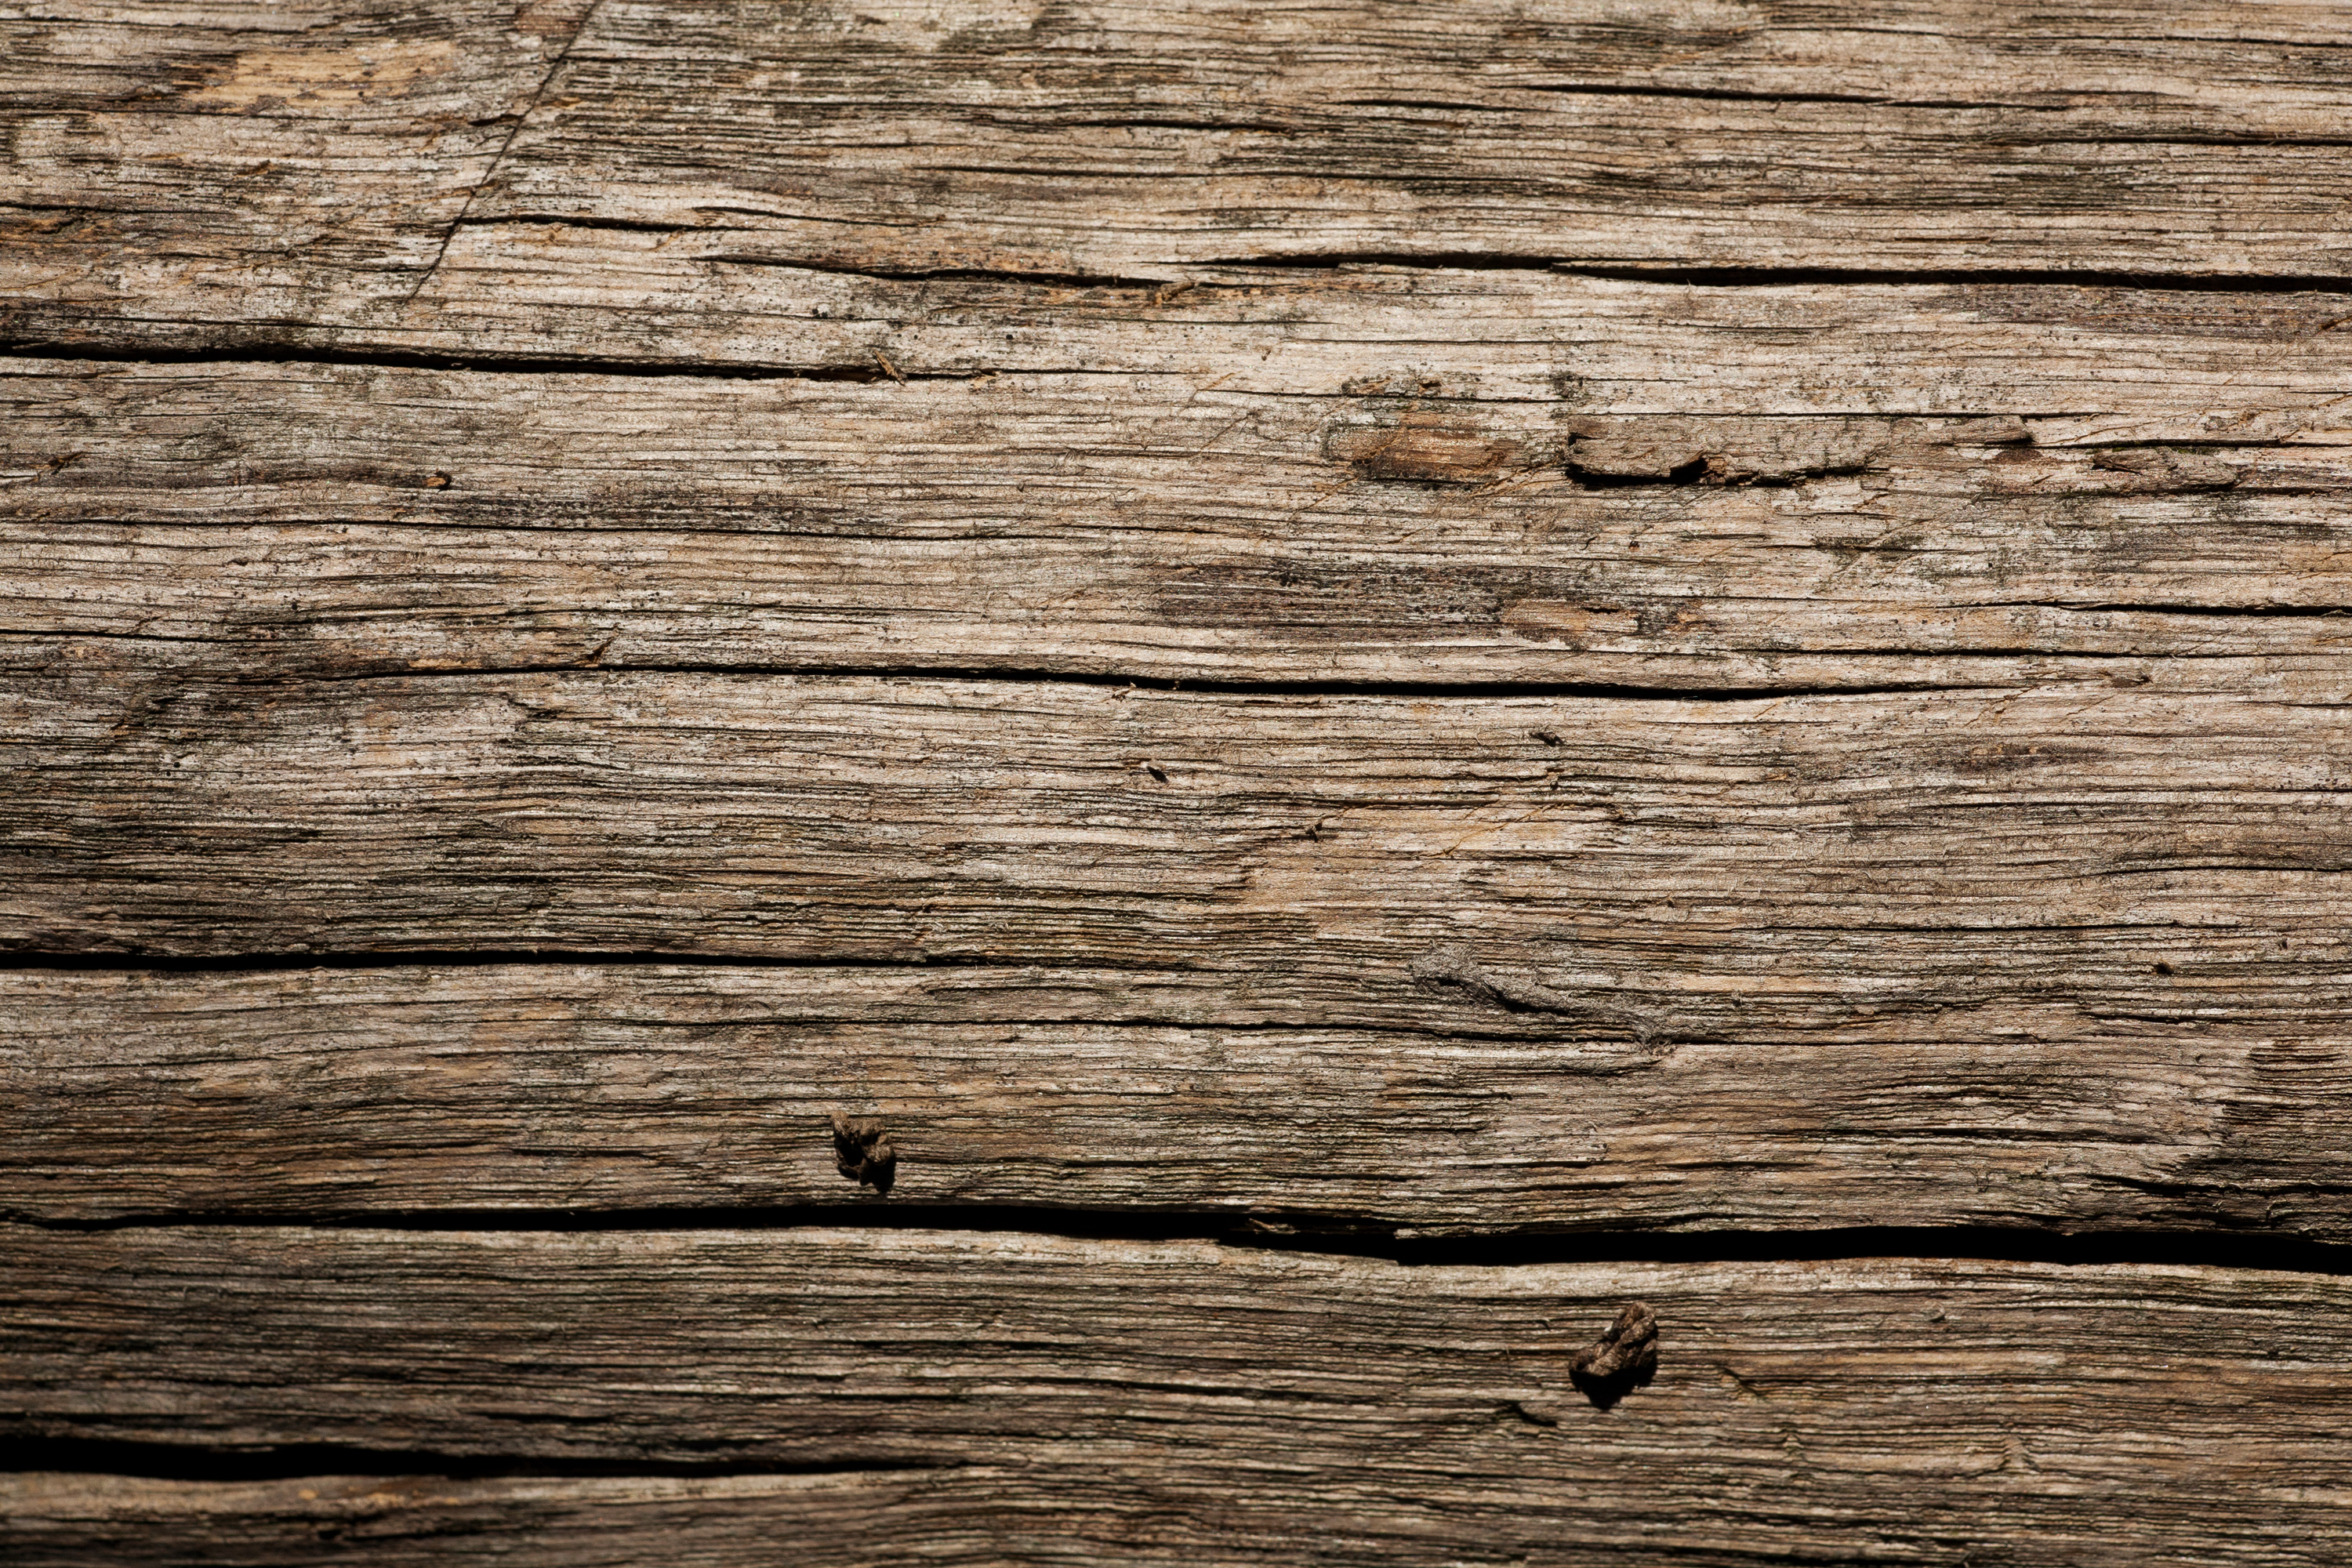 Dry Old Wood Texture image